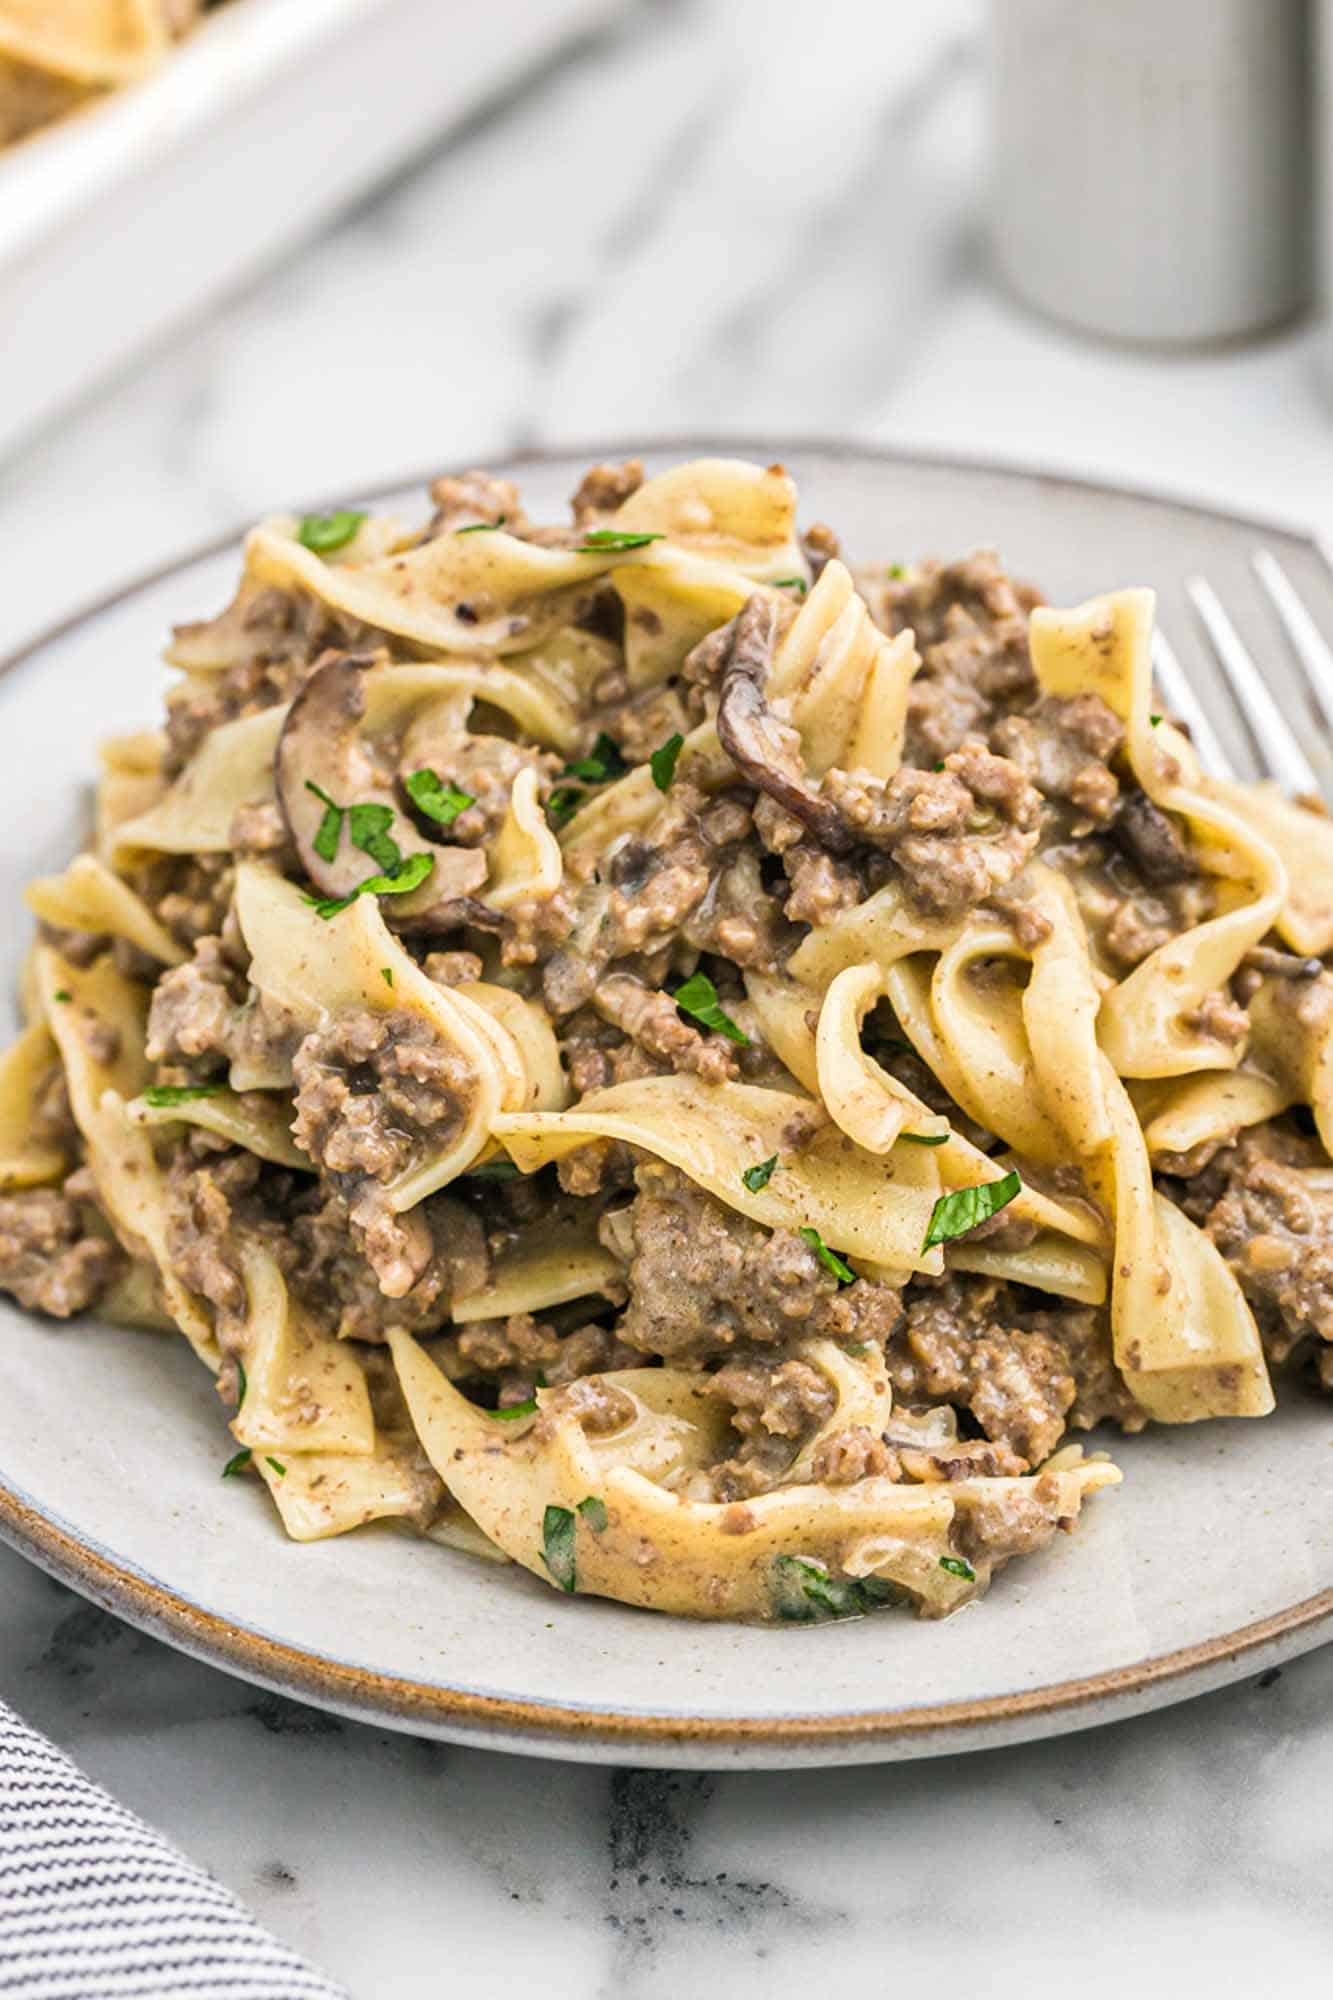 Plated portion of ground beef stroganoff